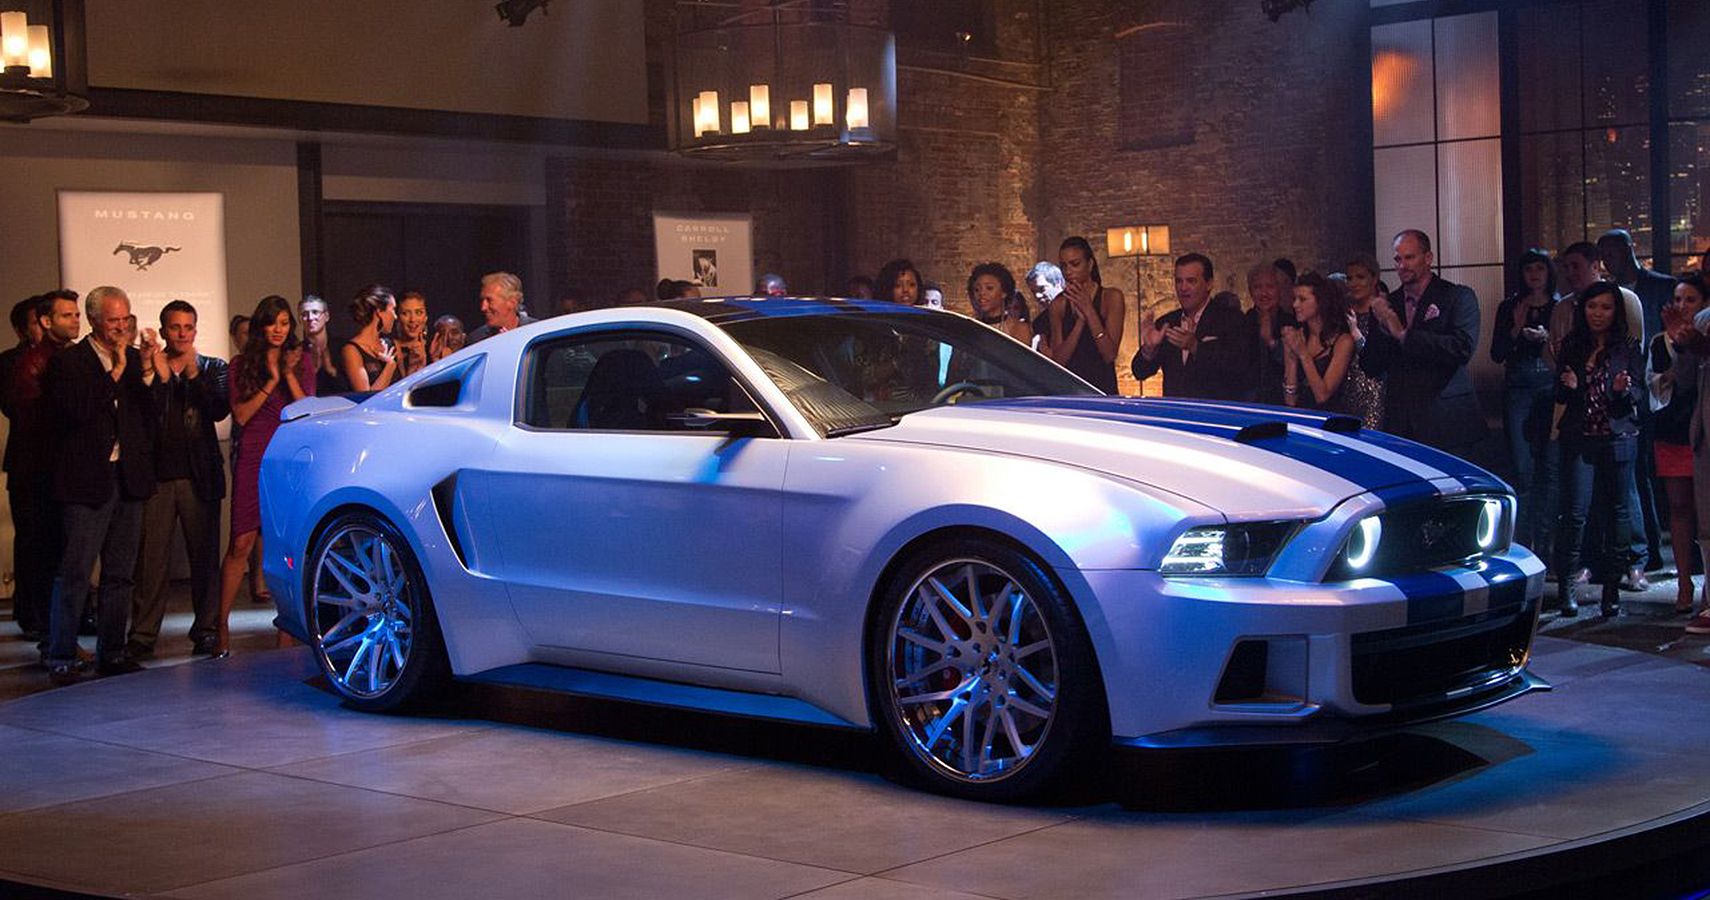 Need For Speed Movie Mustang Sells For $300,000 At The Barrett-Jackson Auction